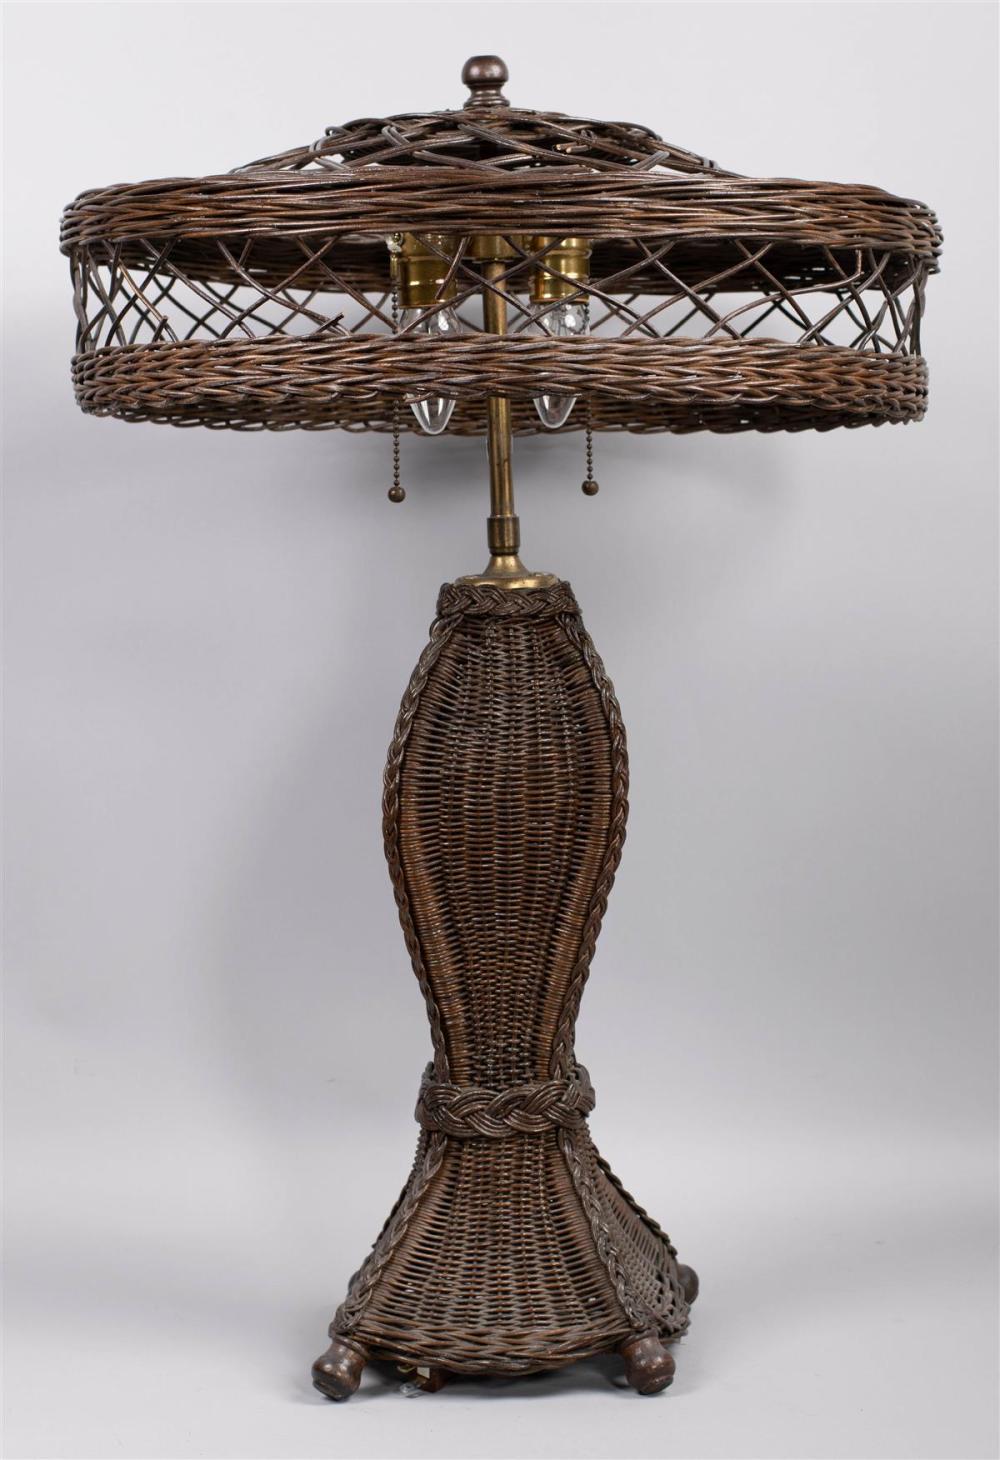 BROWN WICKER TABLE LAMP WITH MATCHING